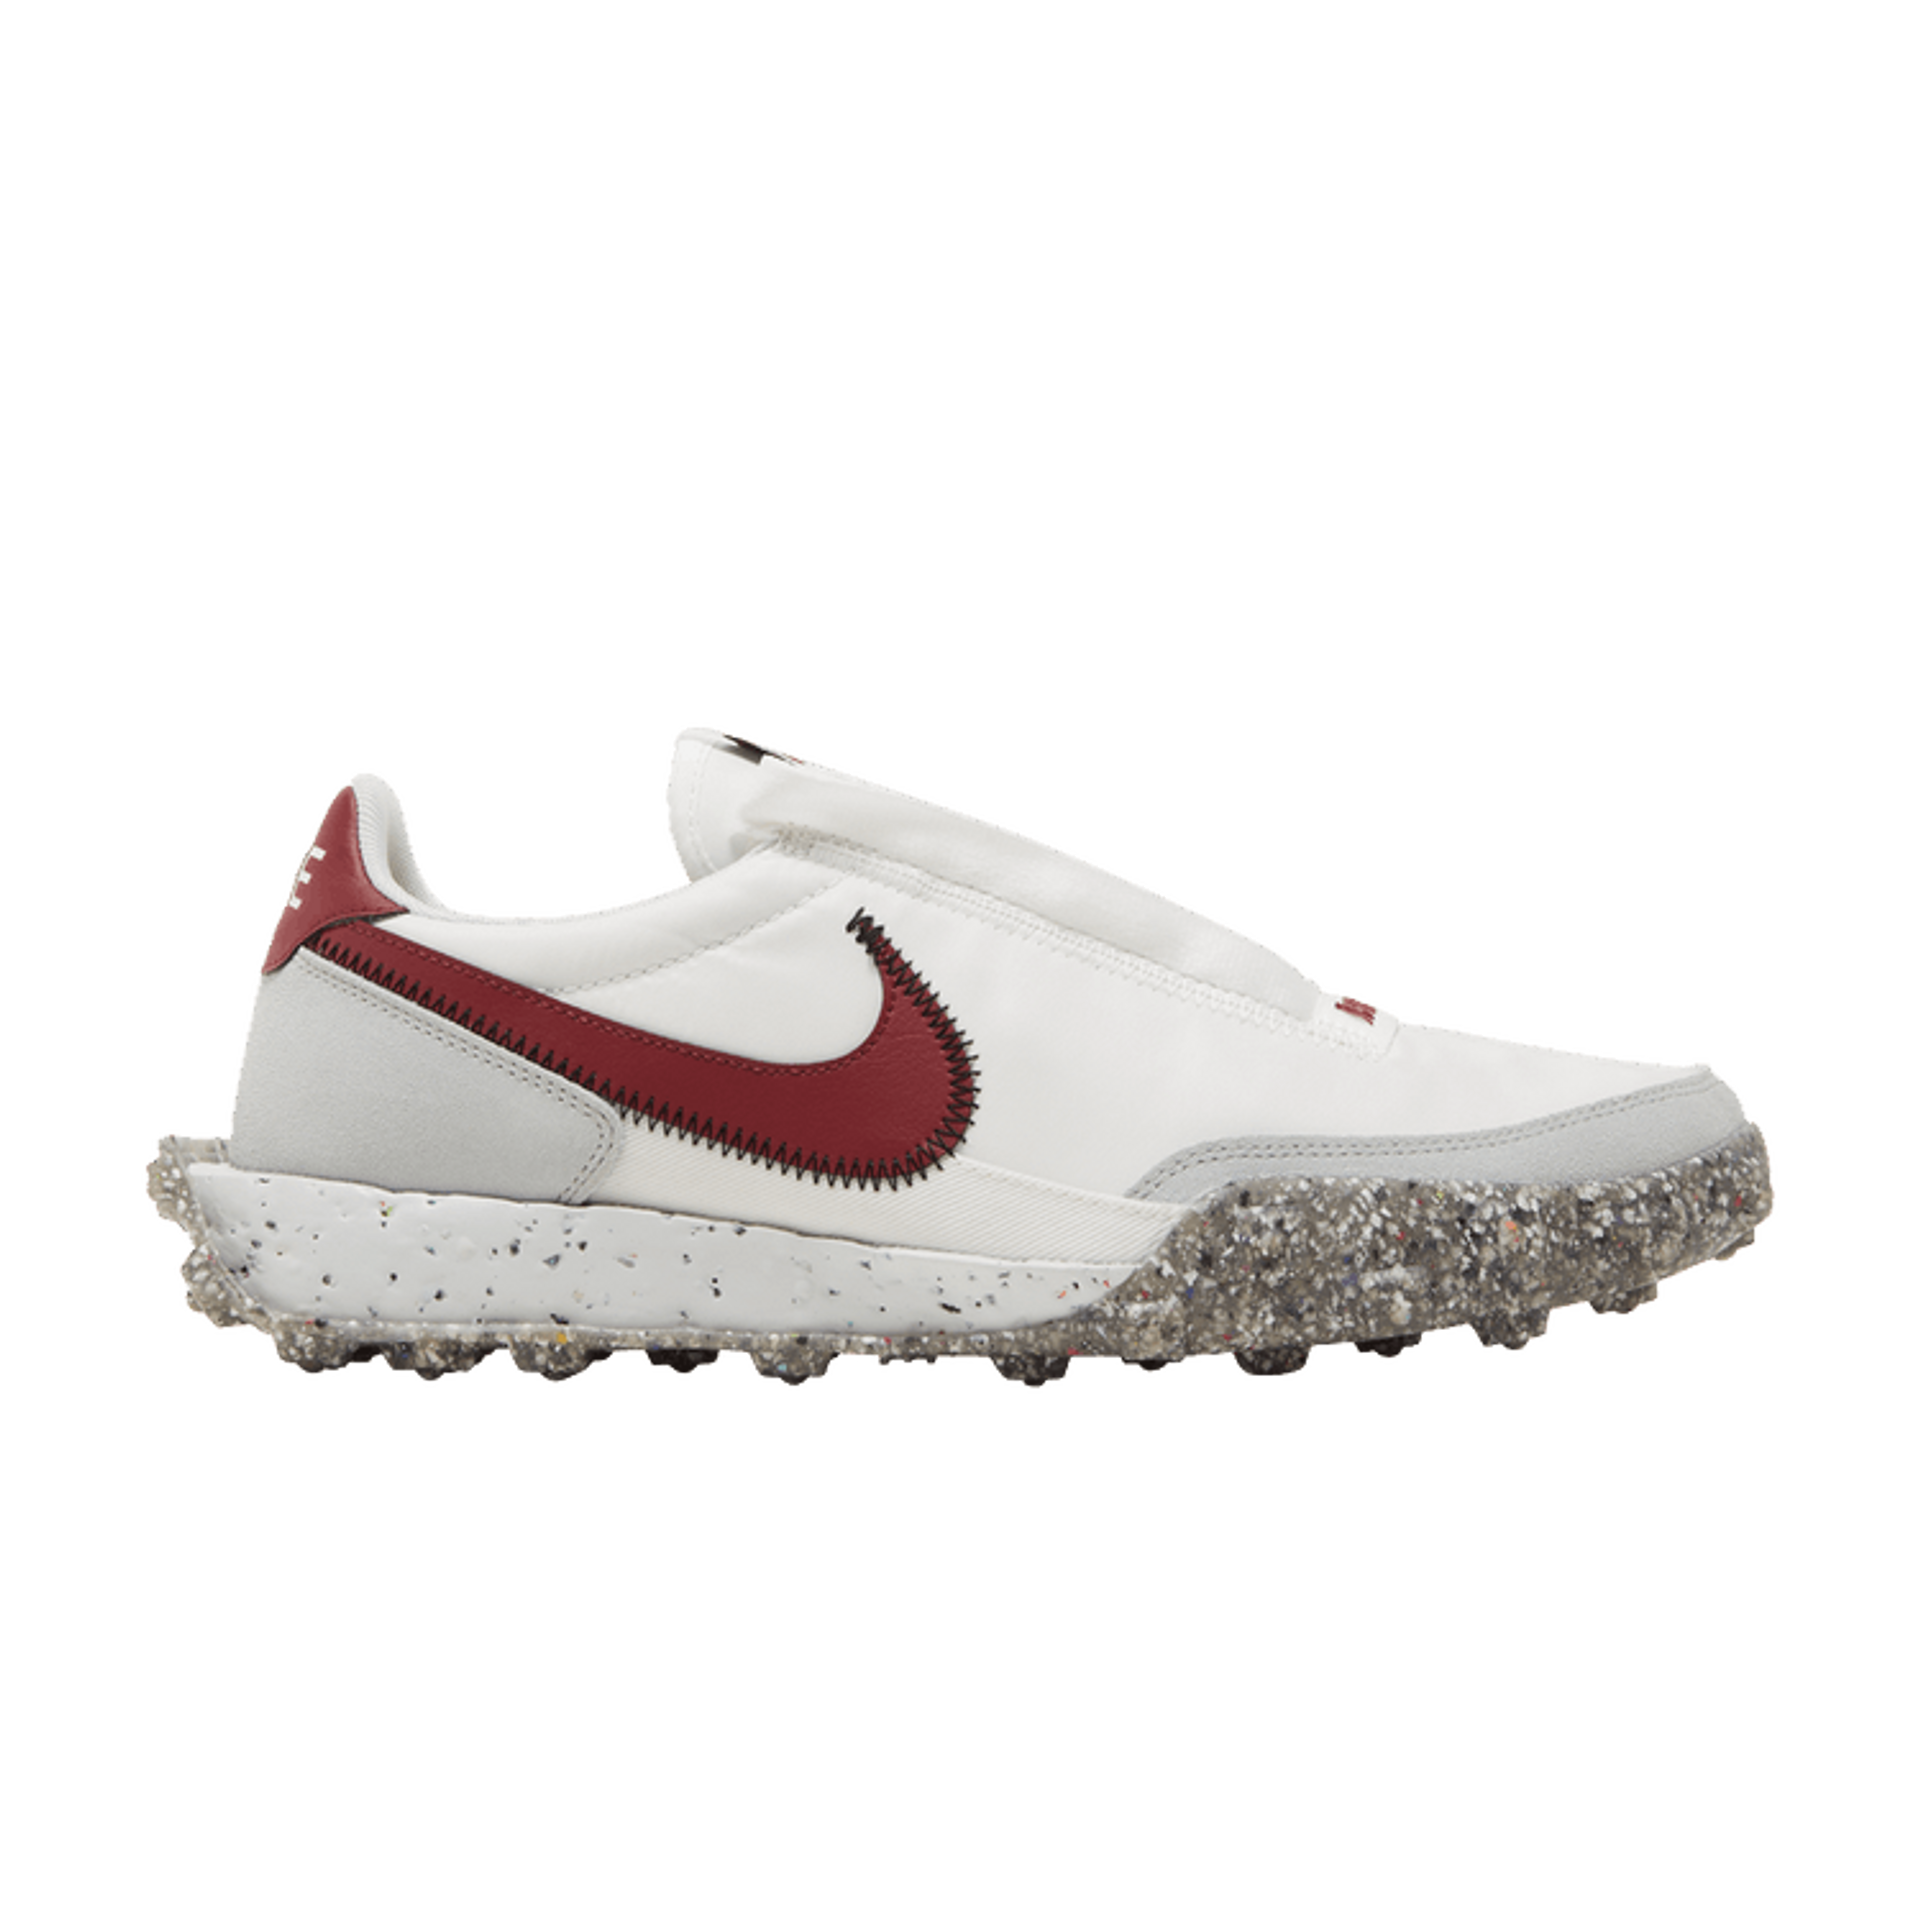 Nike Wmns Waffle Racer Crater 'Summit White Team Red'